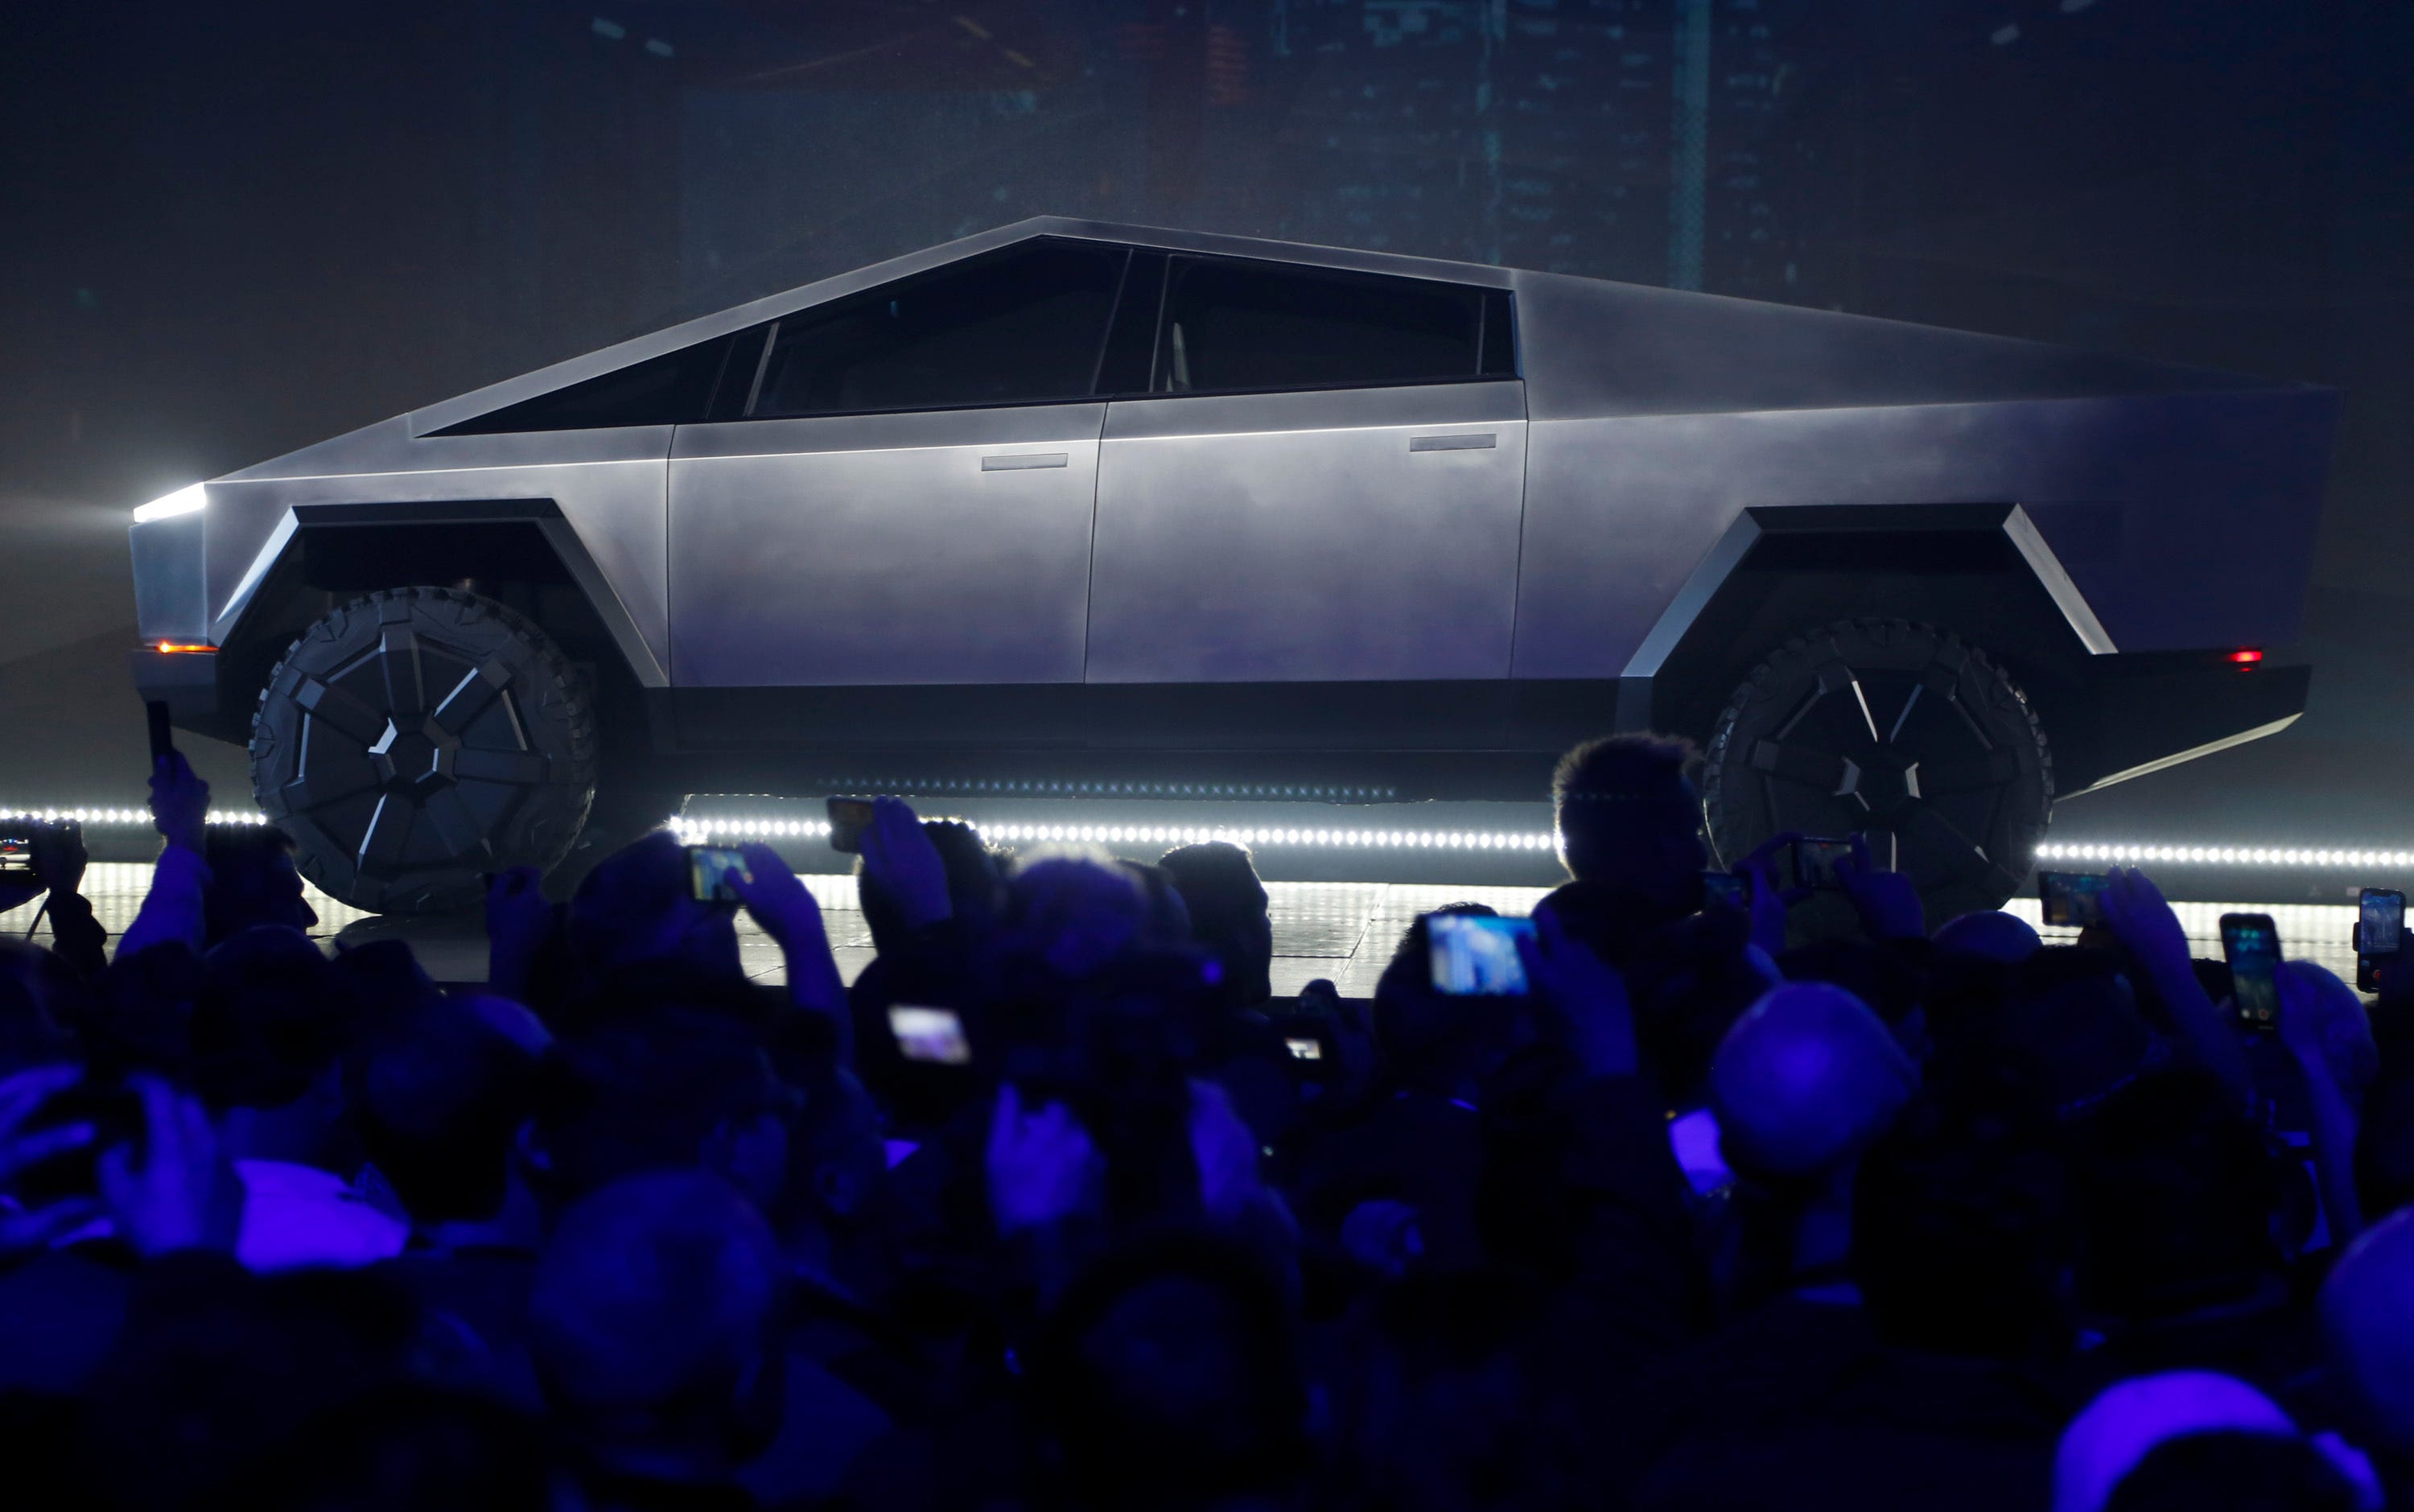 The Tesla Cybertruck is unveiled at Tesla's design studio Thursday, Nov. 21, 2019, in Hawthorne, Calif. CEO Elon Musk is taking on the workhorse heavy pickup truck market with his latest electric vehicle.